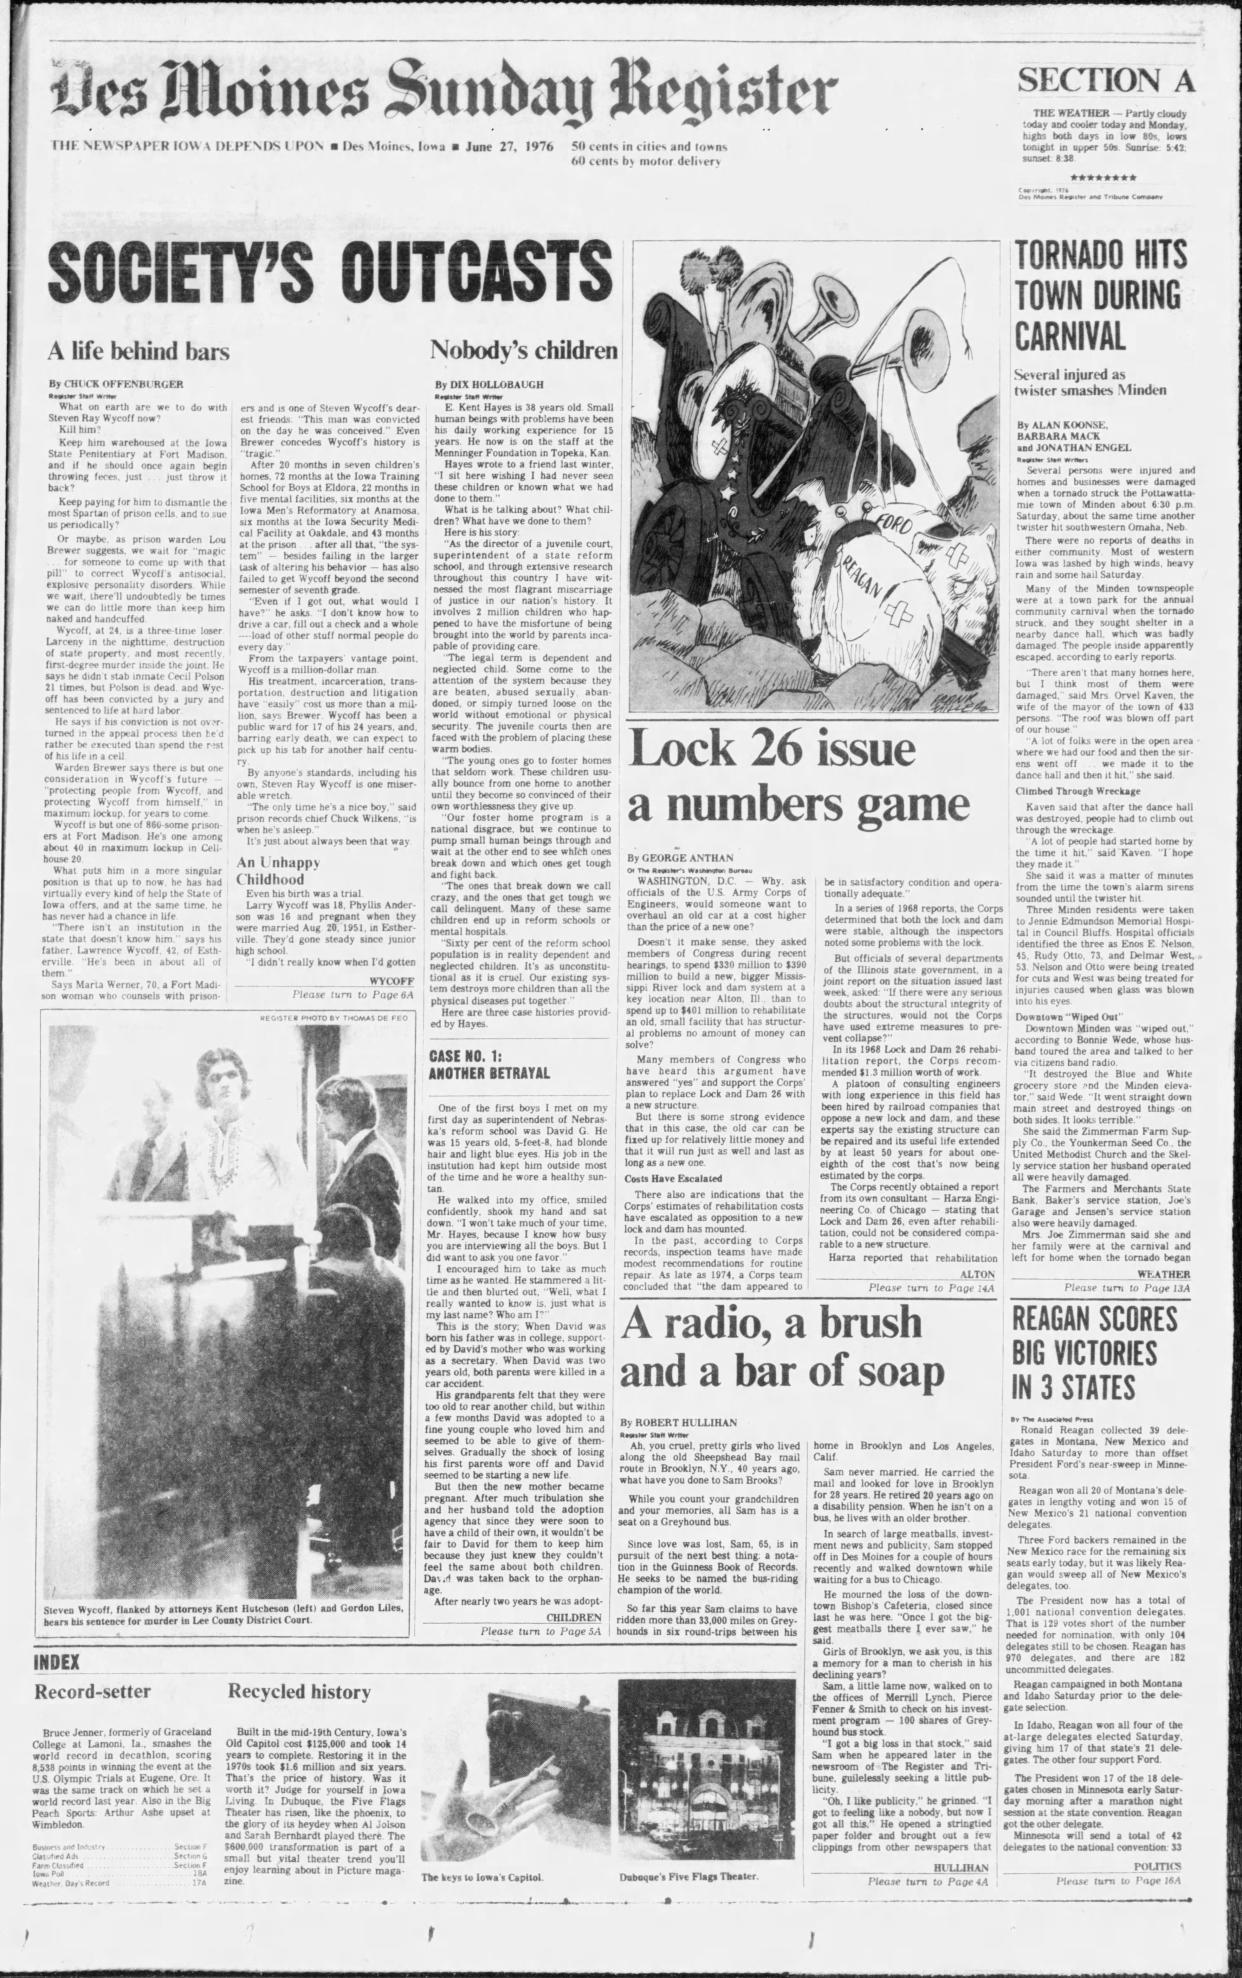 A June 1976 edition of the Des Moines Register reports on a devastating tornado strike on Minden. The town was struck again during April 26 storms, suffering severe damage.